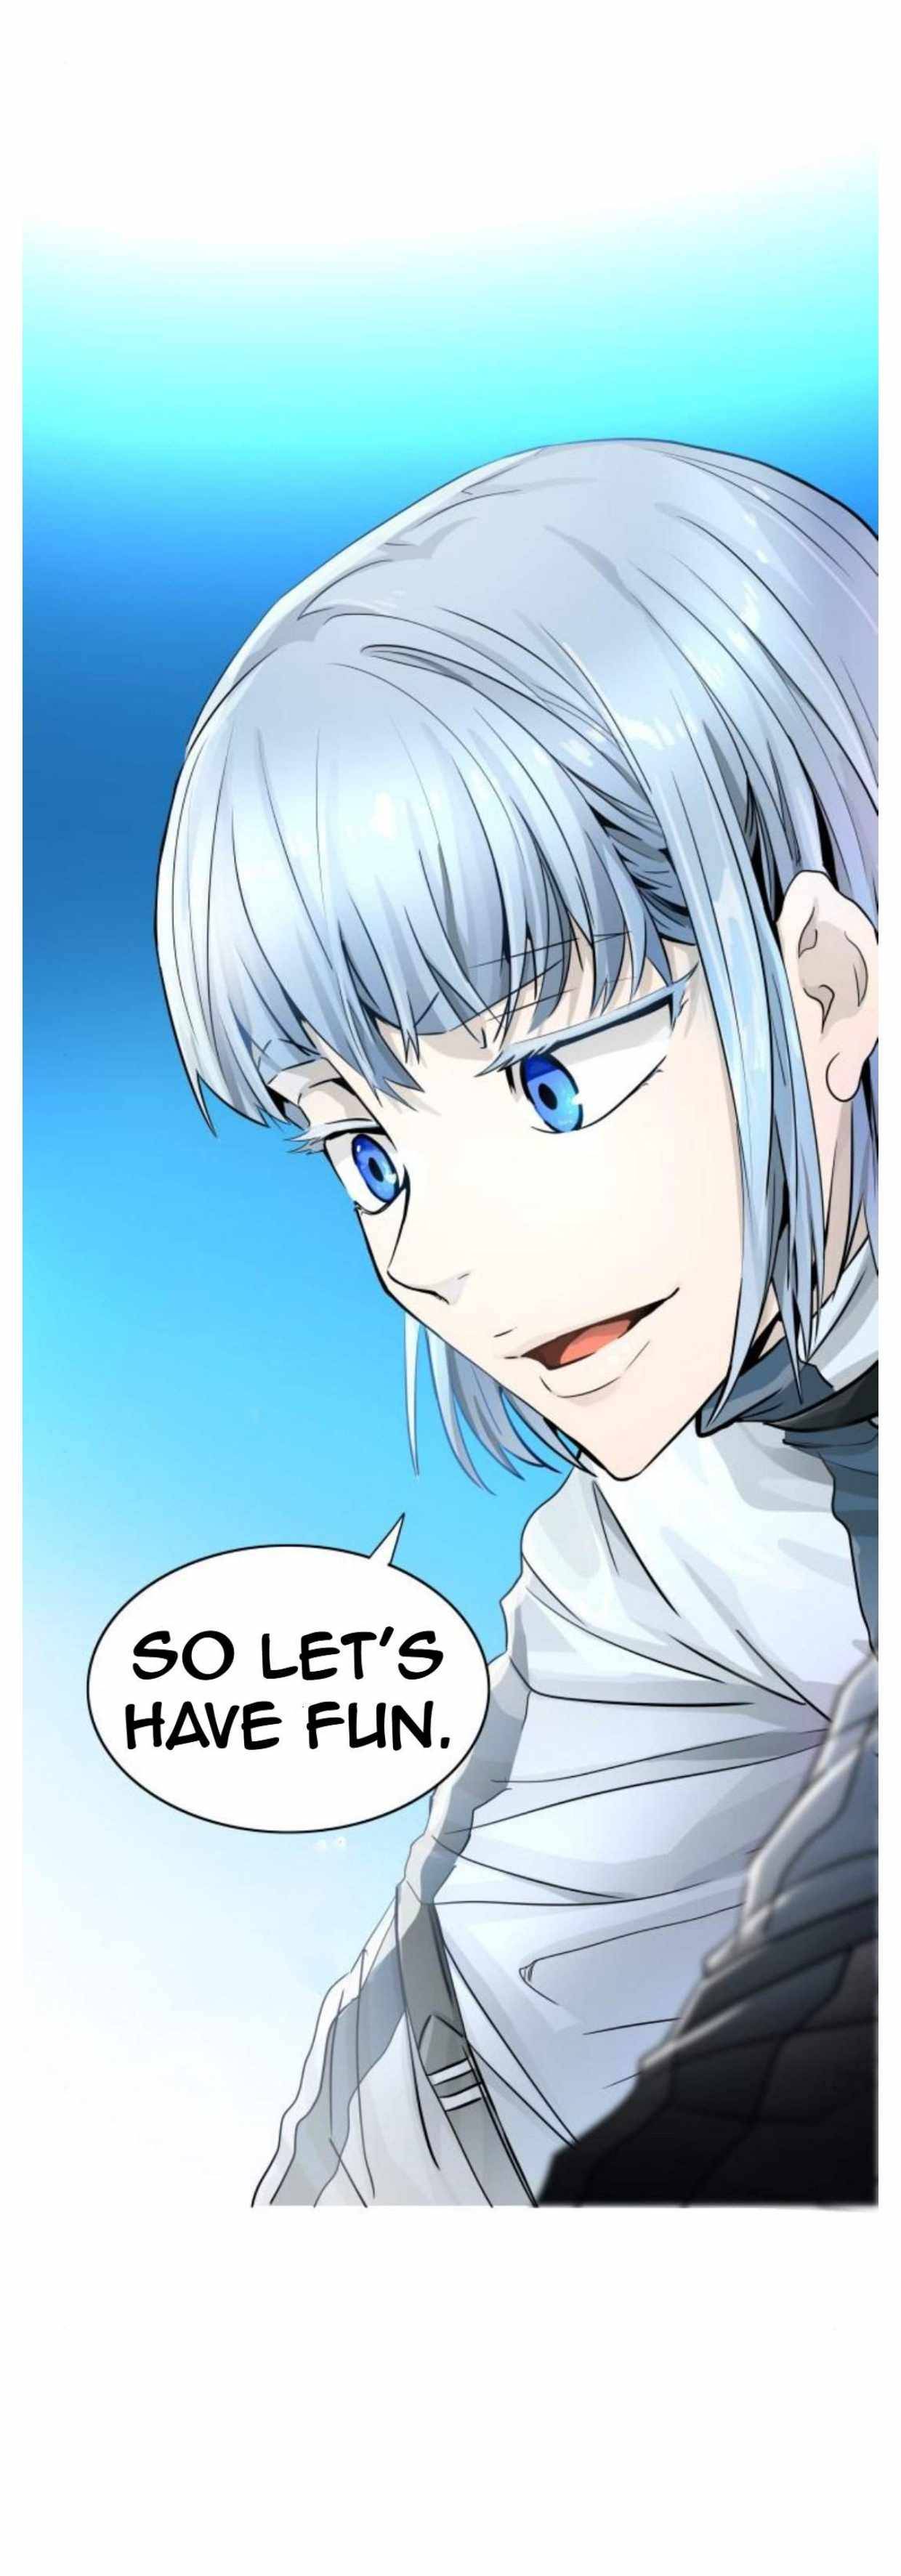 tower of god 500, tower of god 500, Read tower of god 500, tower of god 500 Manga, tower of god 500 english, tower of god 500 raw manga, tower of god 500 online, tower of god 500 high quality, tower of god 500 chapter, tower of god 500 manga scan